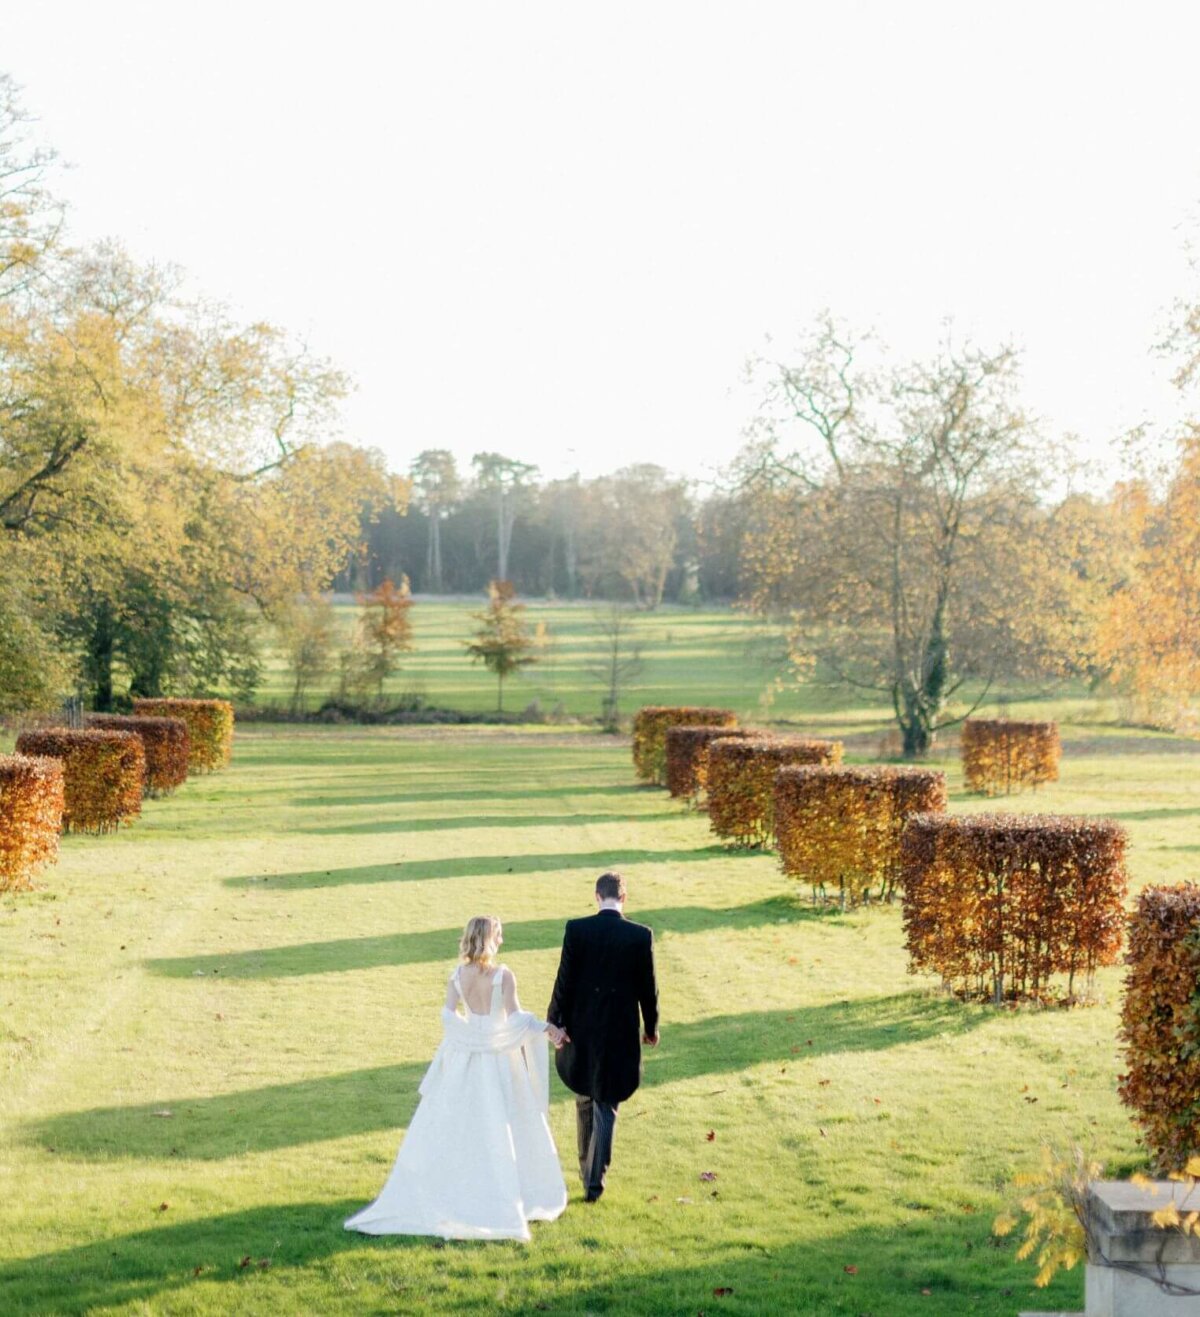 Emma and William Wedding Blog - Walking the Lake Lawn on the grounds of St Giles House